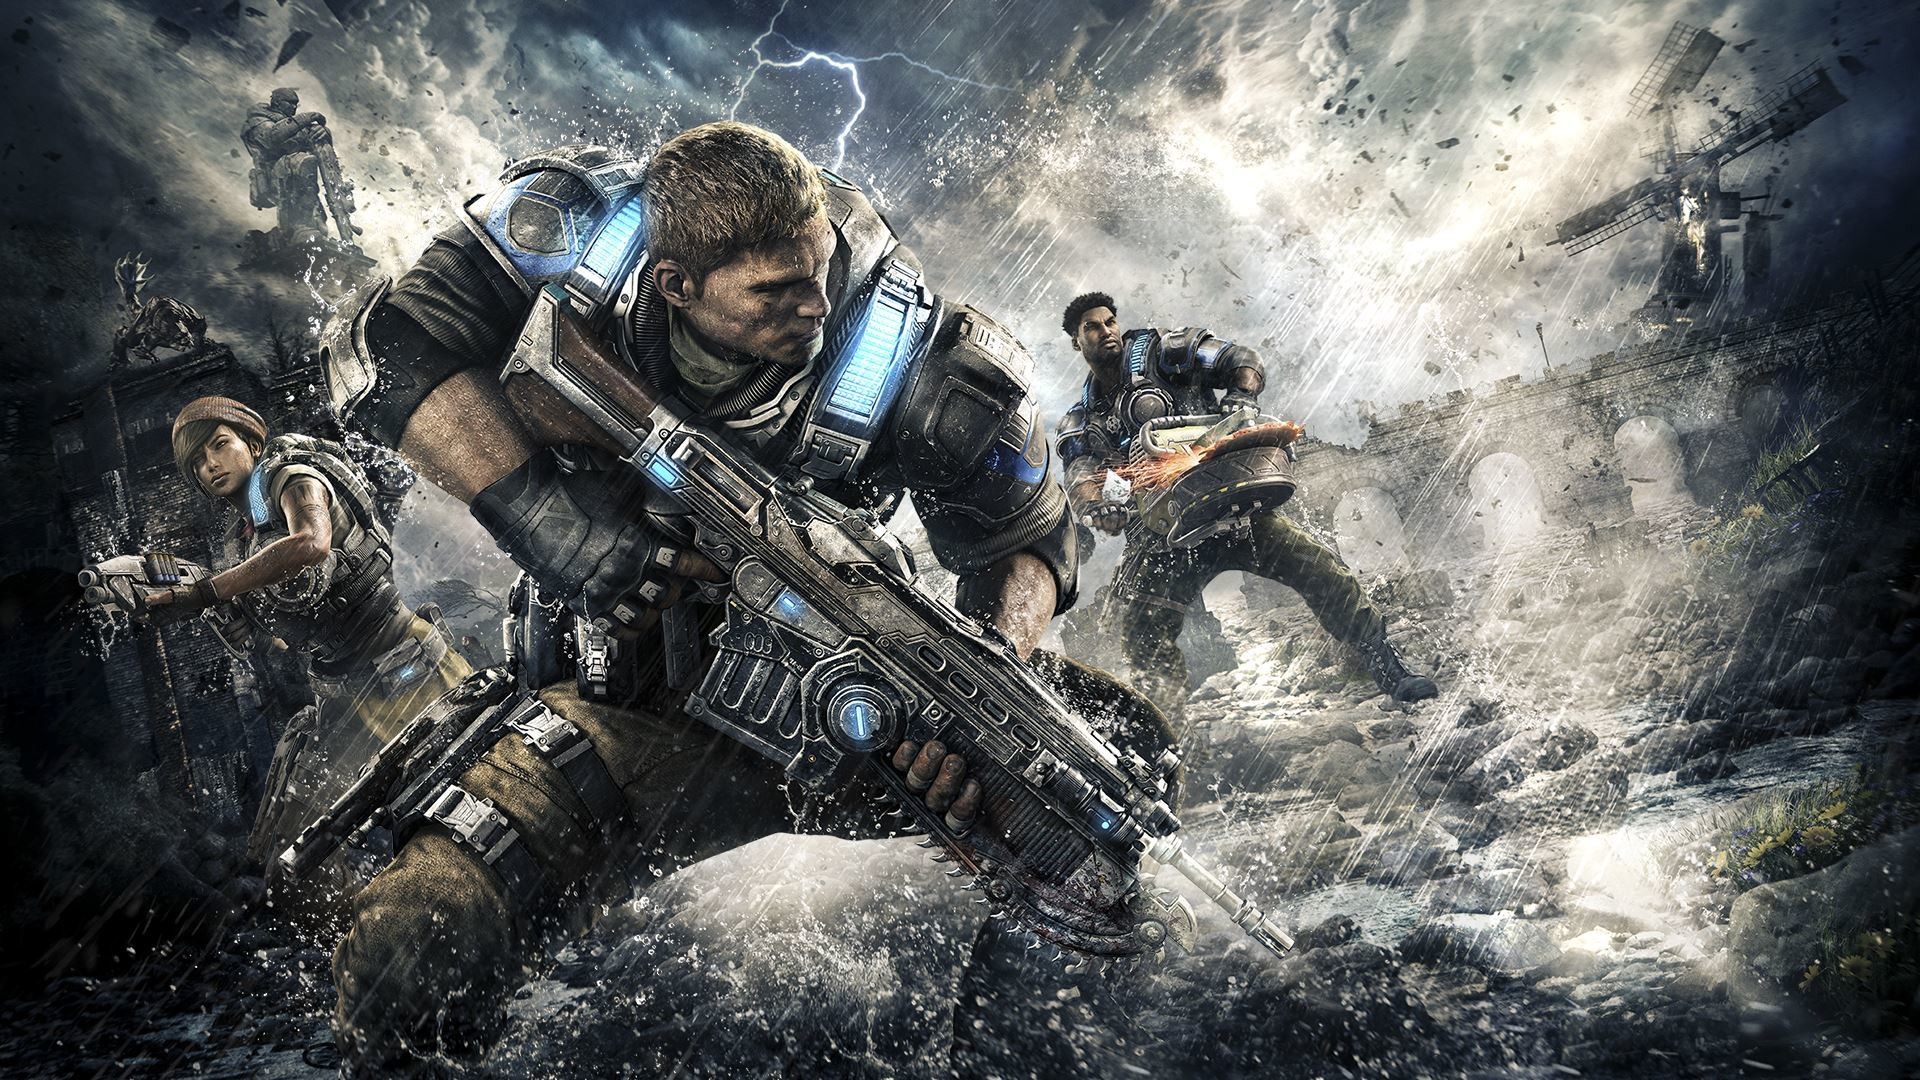 1920x1080 'Gears of War 4' Successfully Avoids The Problems of 'Halo 4'